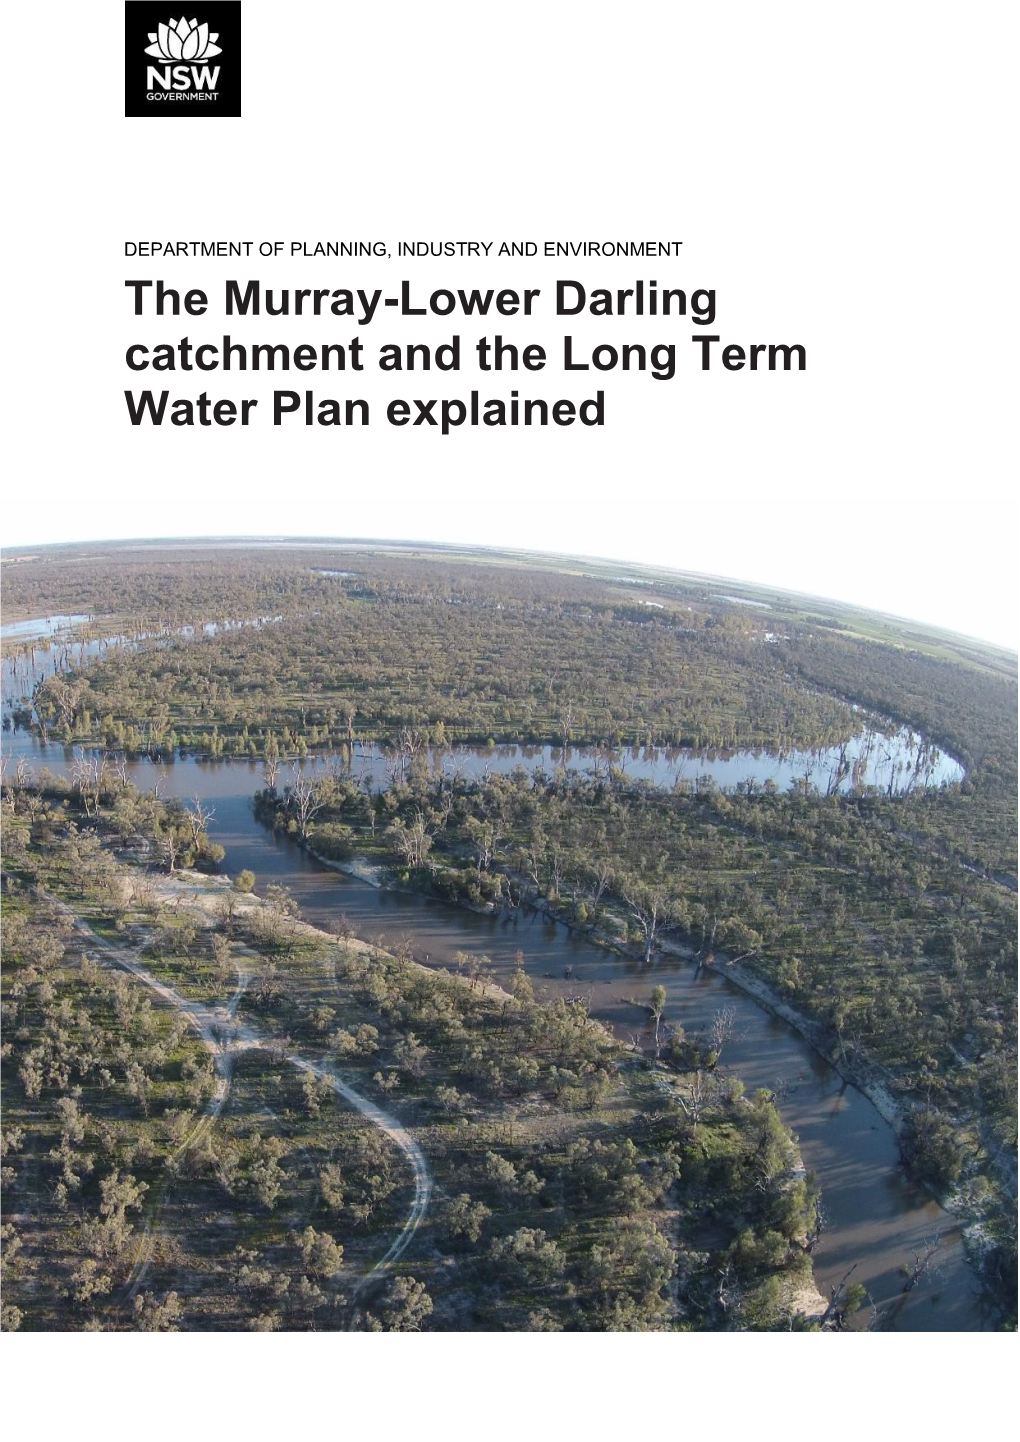 The Murray-Lower Darling Catchment and the Long Term Water Plan Explained